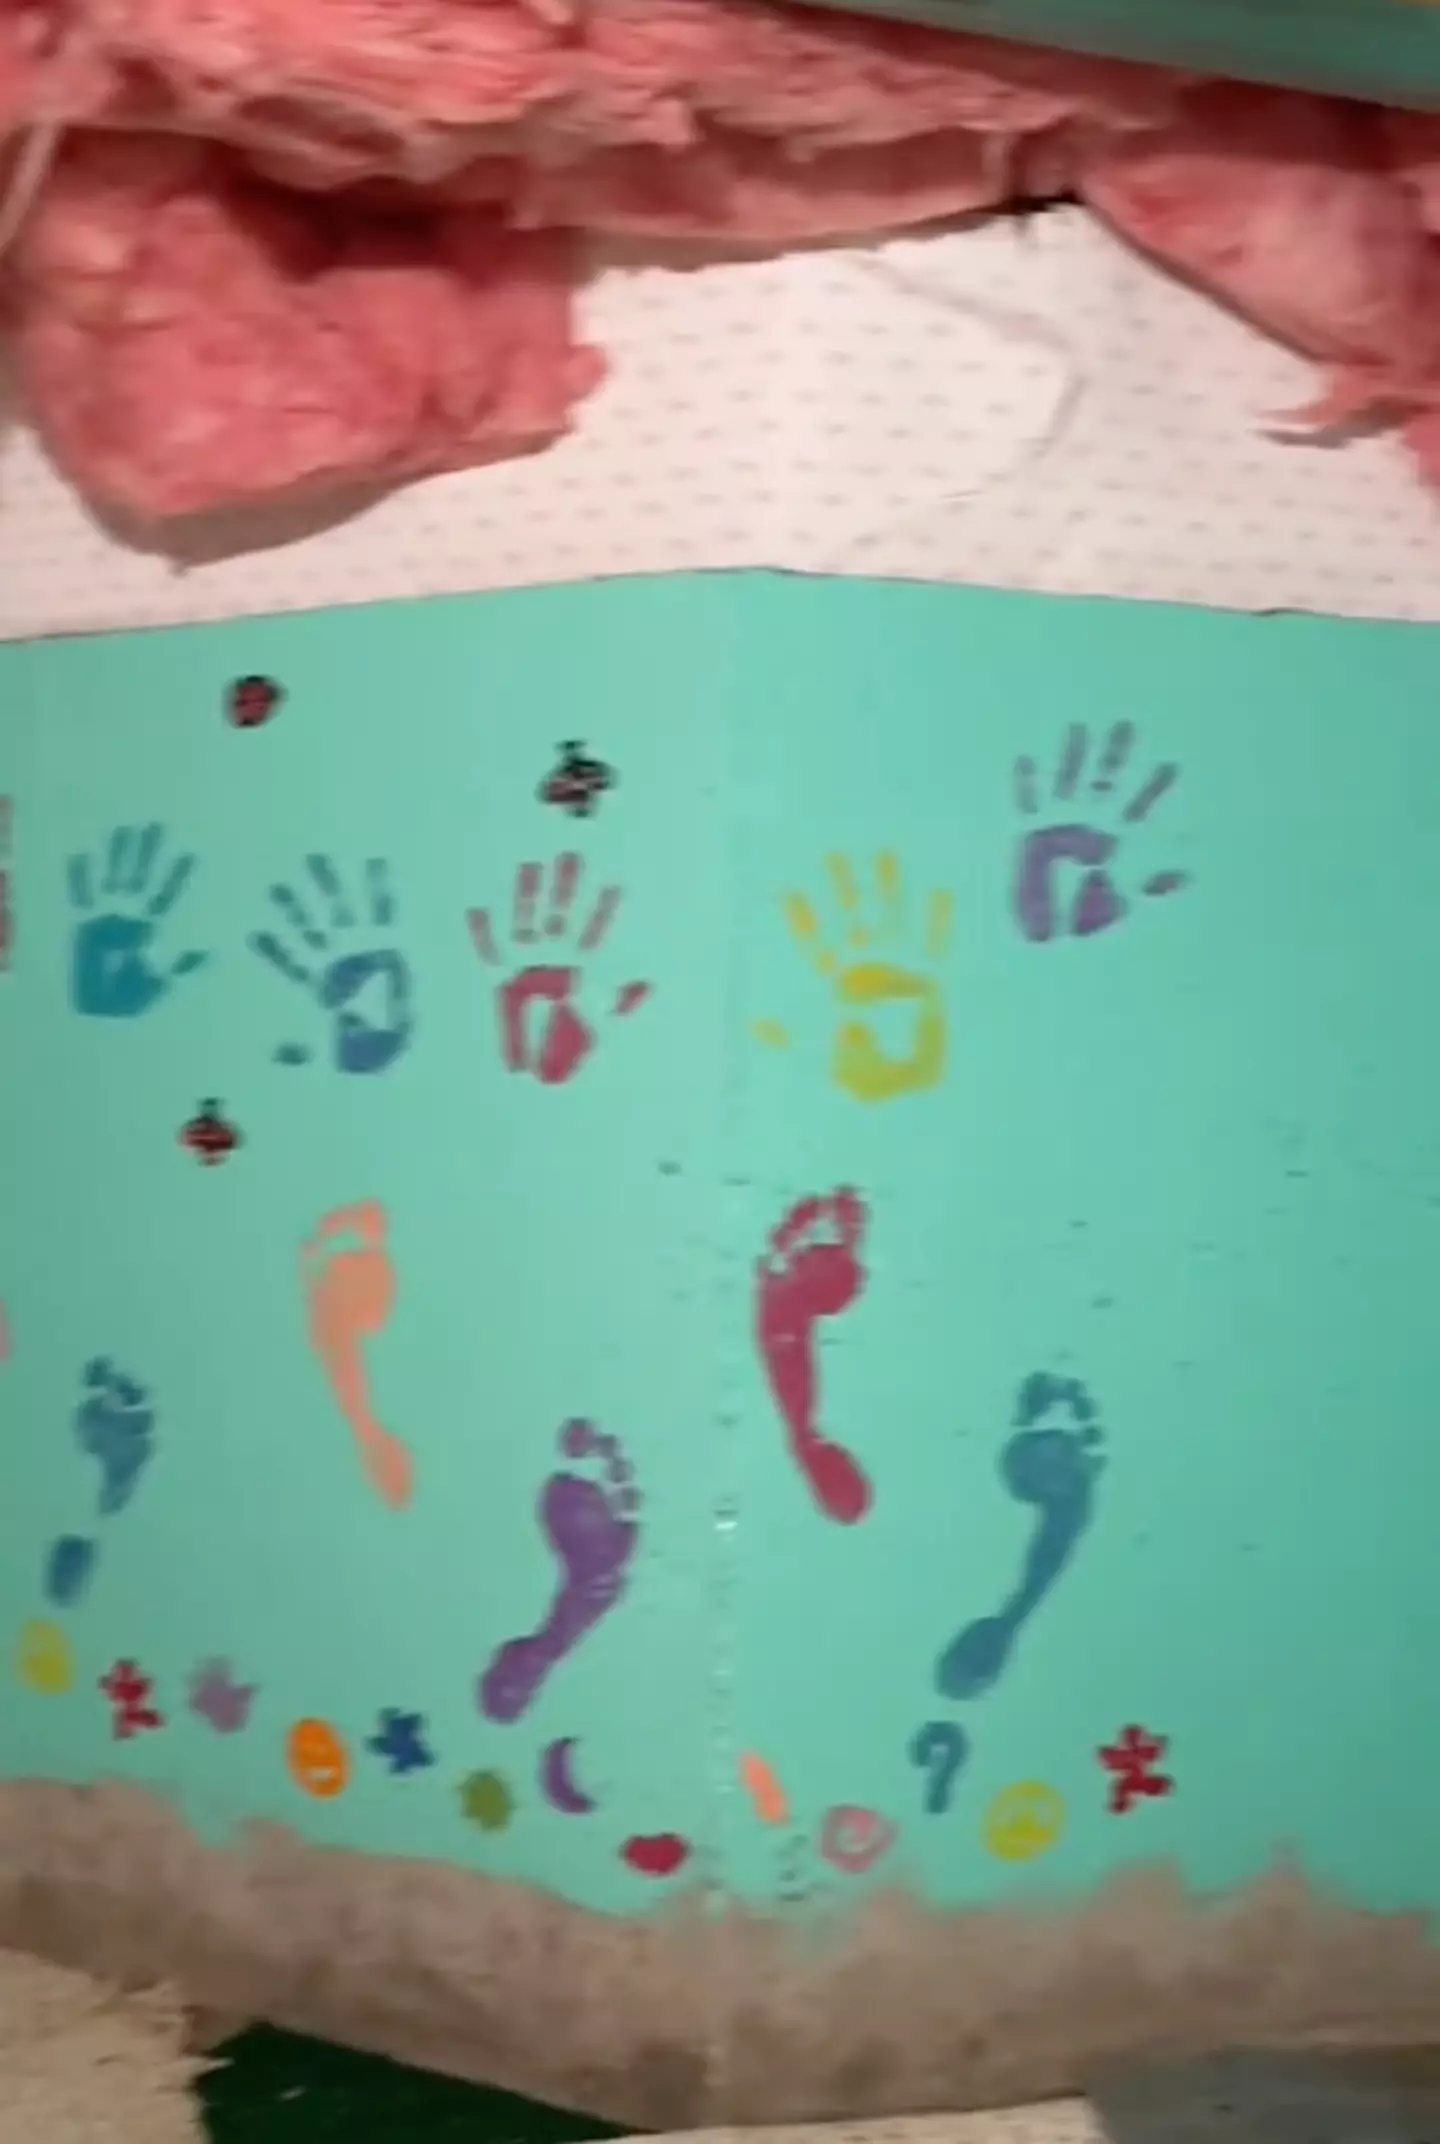 There were some terrifying handprints on the wall.